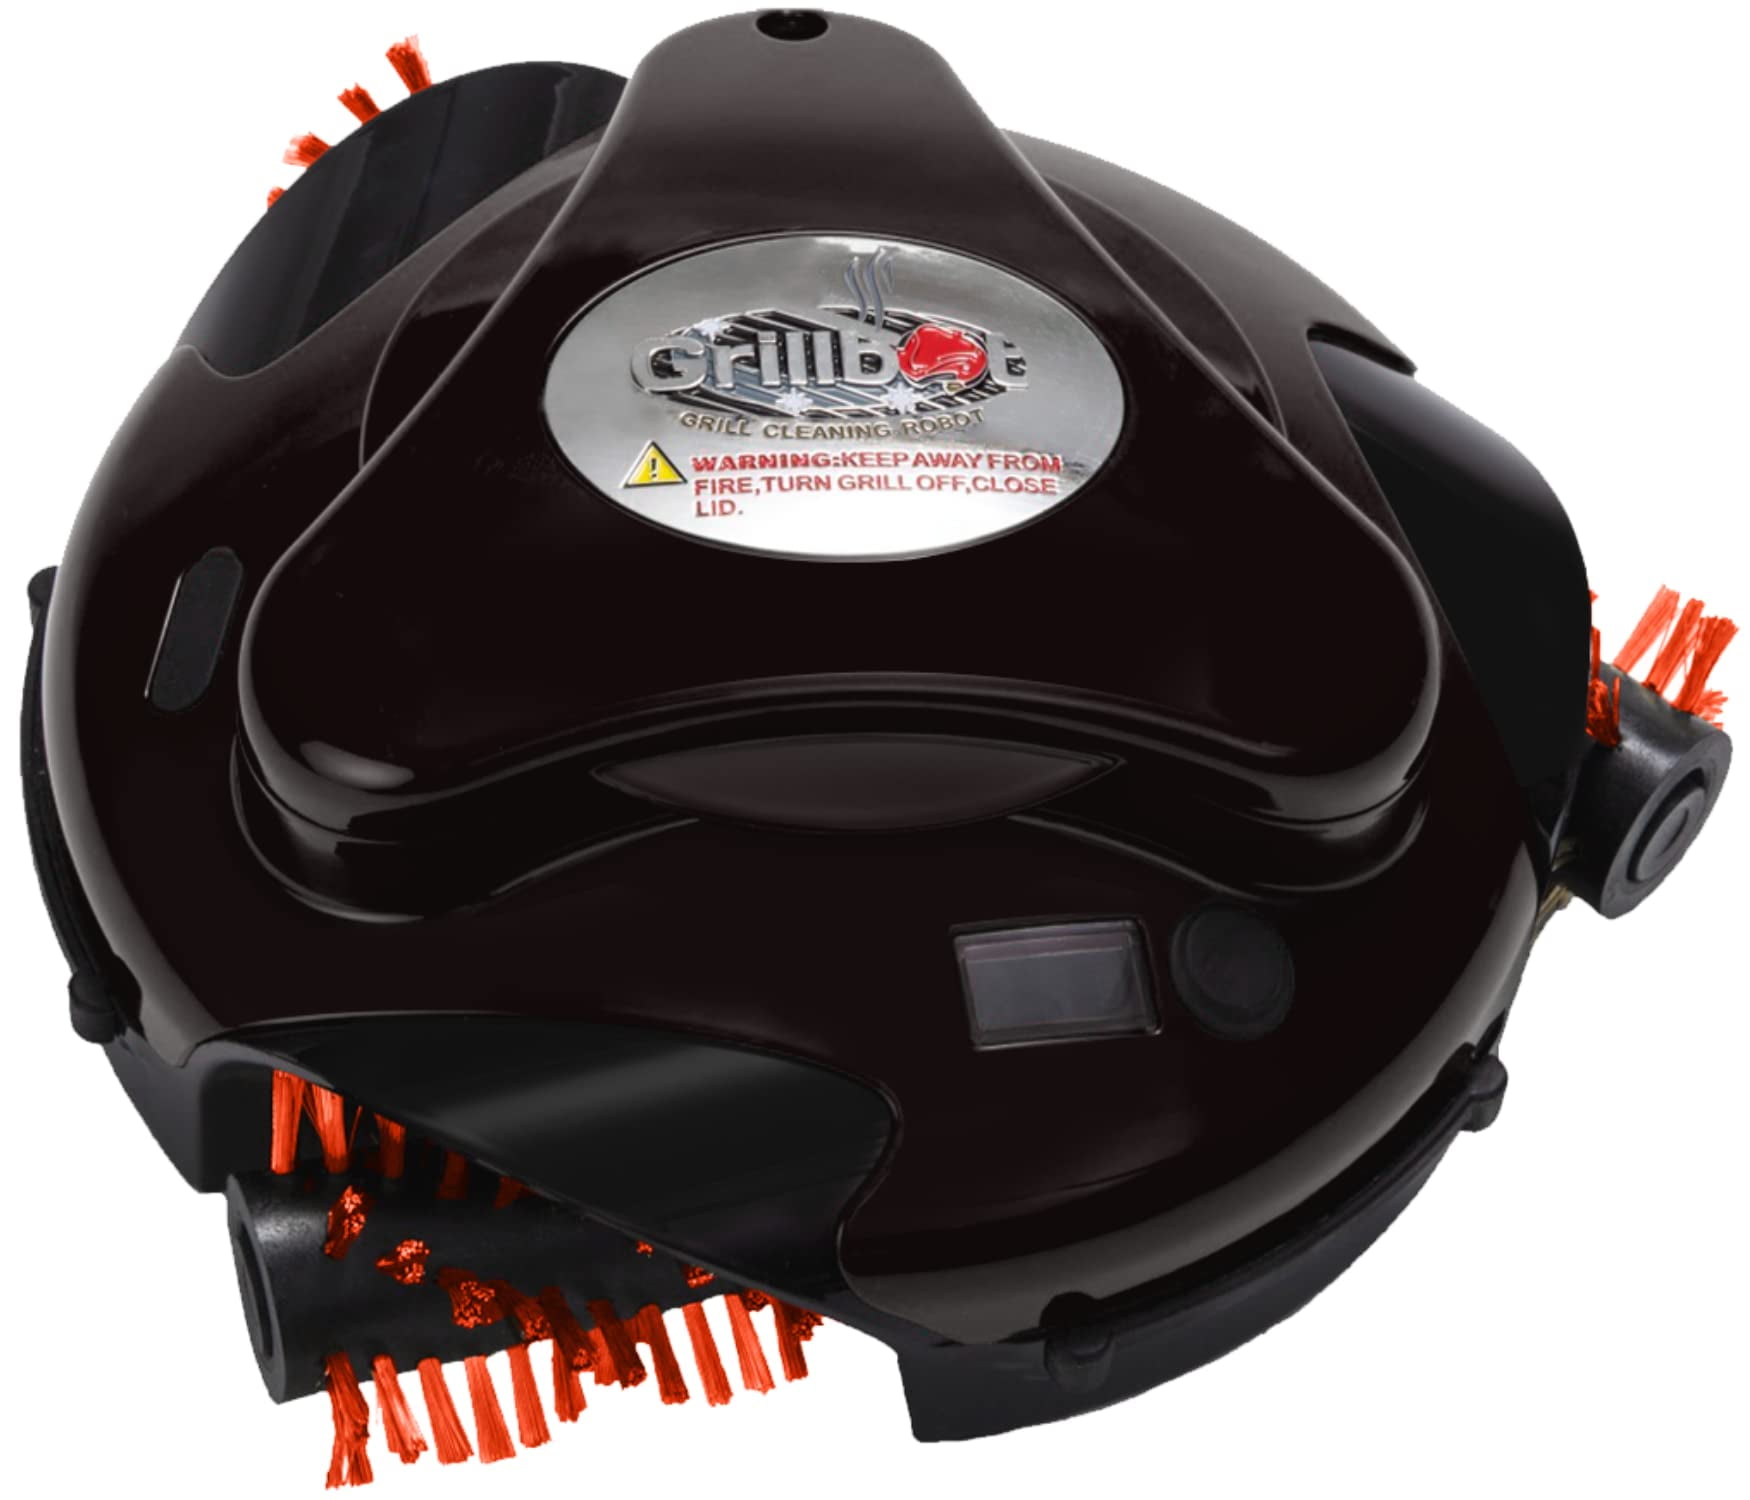 Grillbot Automatic Grill Cleaning Robot with Nylon Brushes (Black) - image 1 of 7